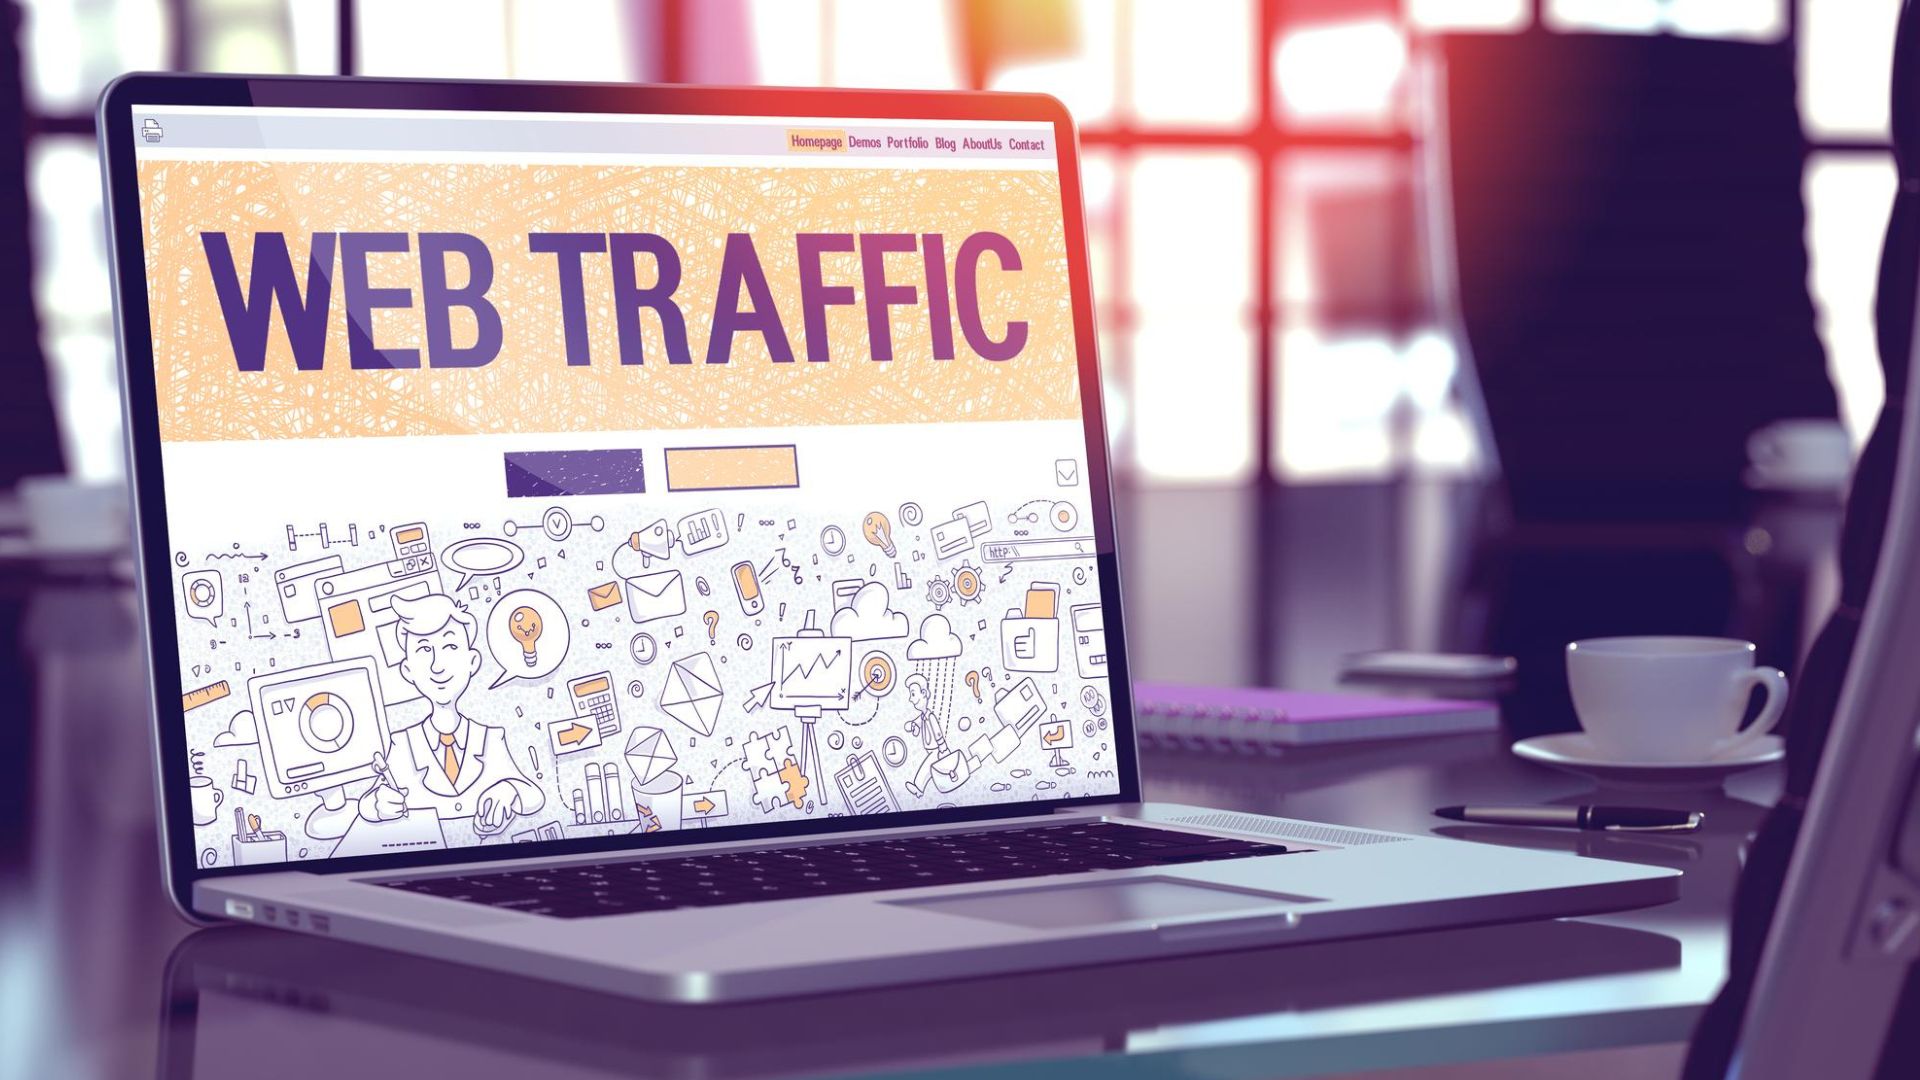 Your Website Traffic